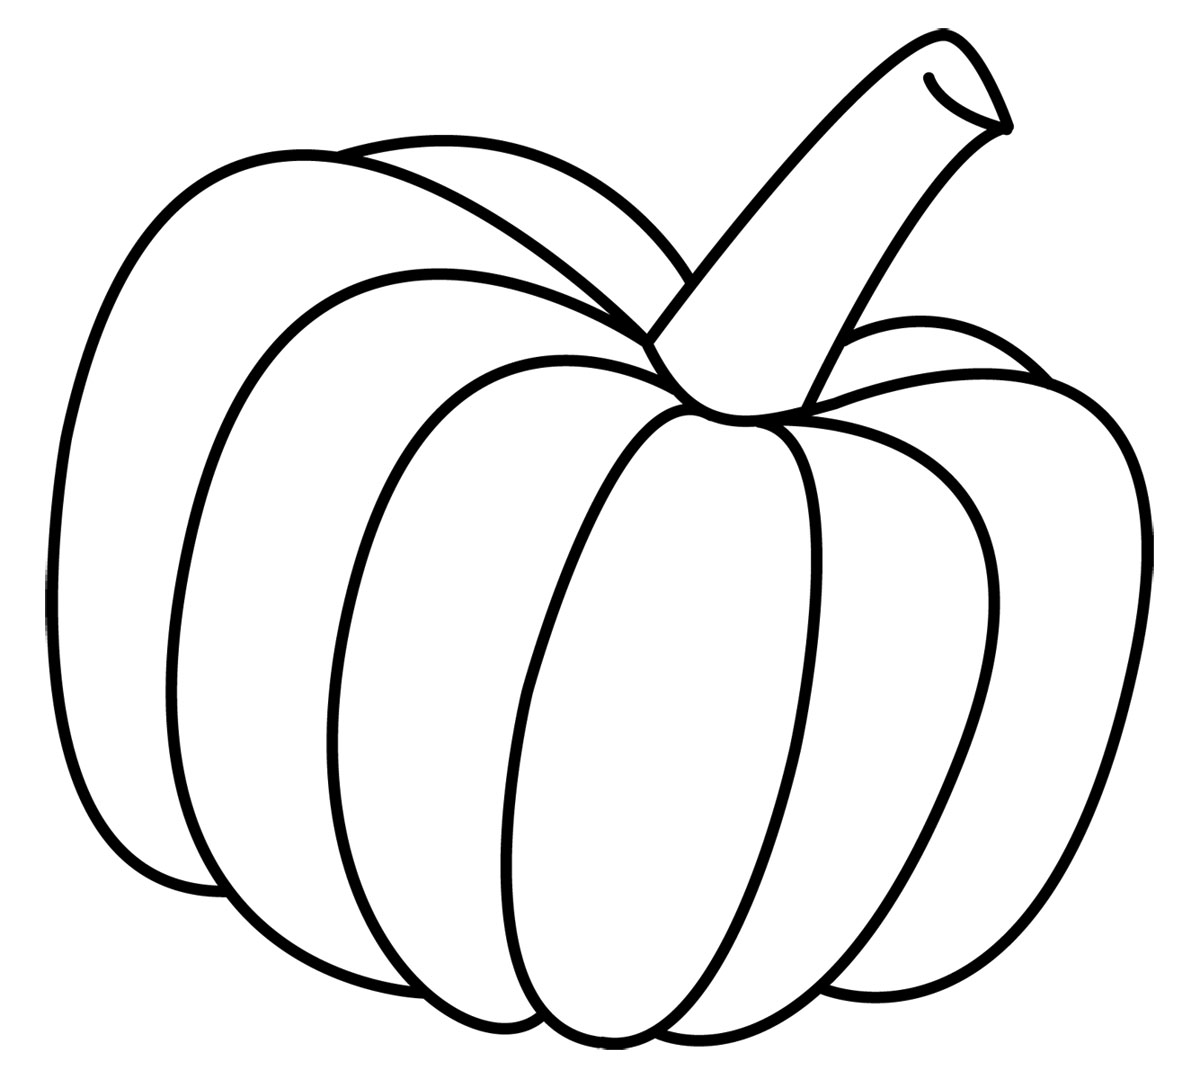 Black and white halloween pumpkin clipart image